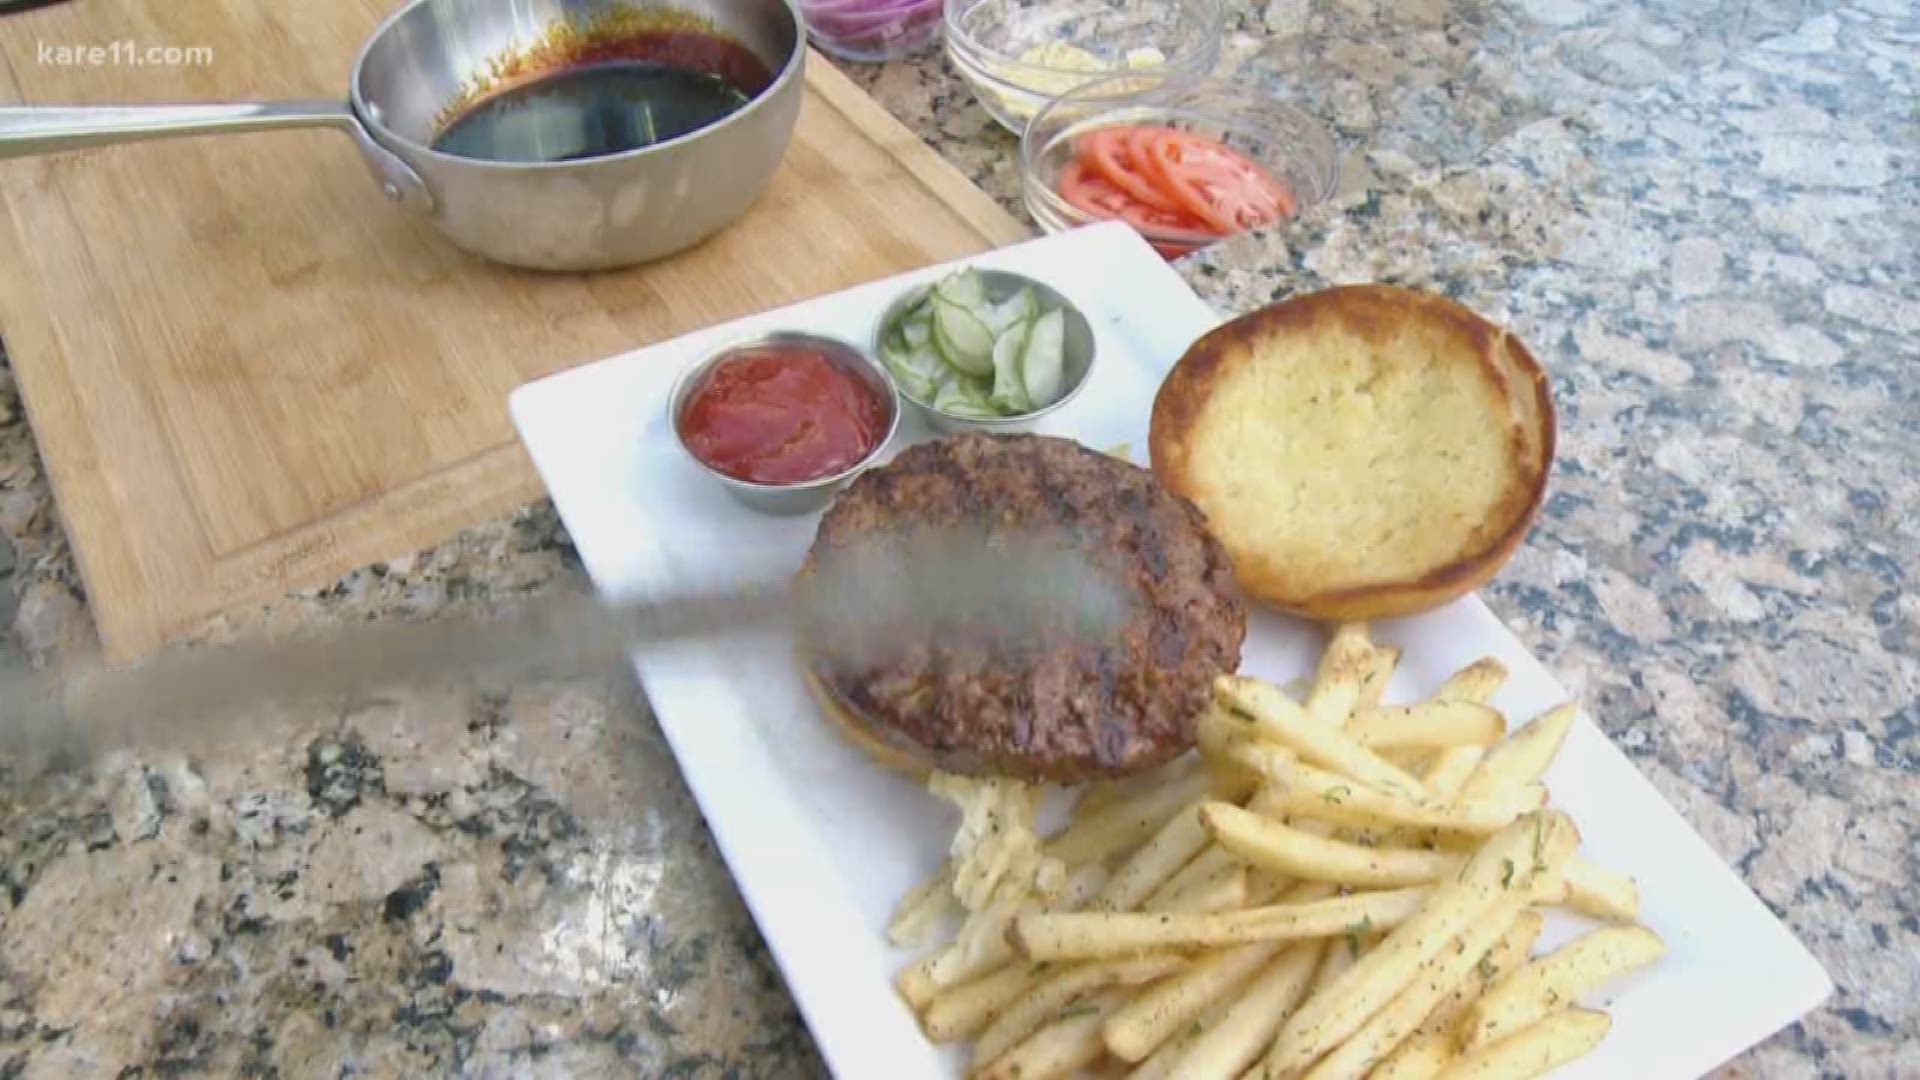 Macy's Lakeshore Grill Chef Joe Studenberg shares some tips for upping your grilling game.